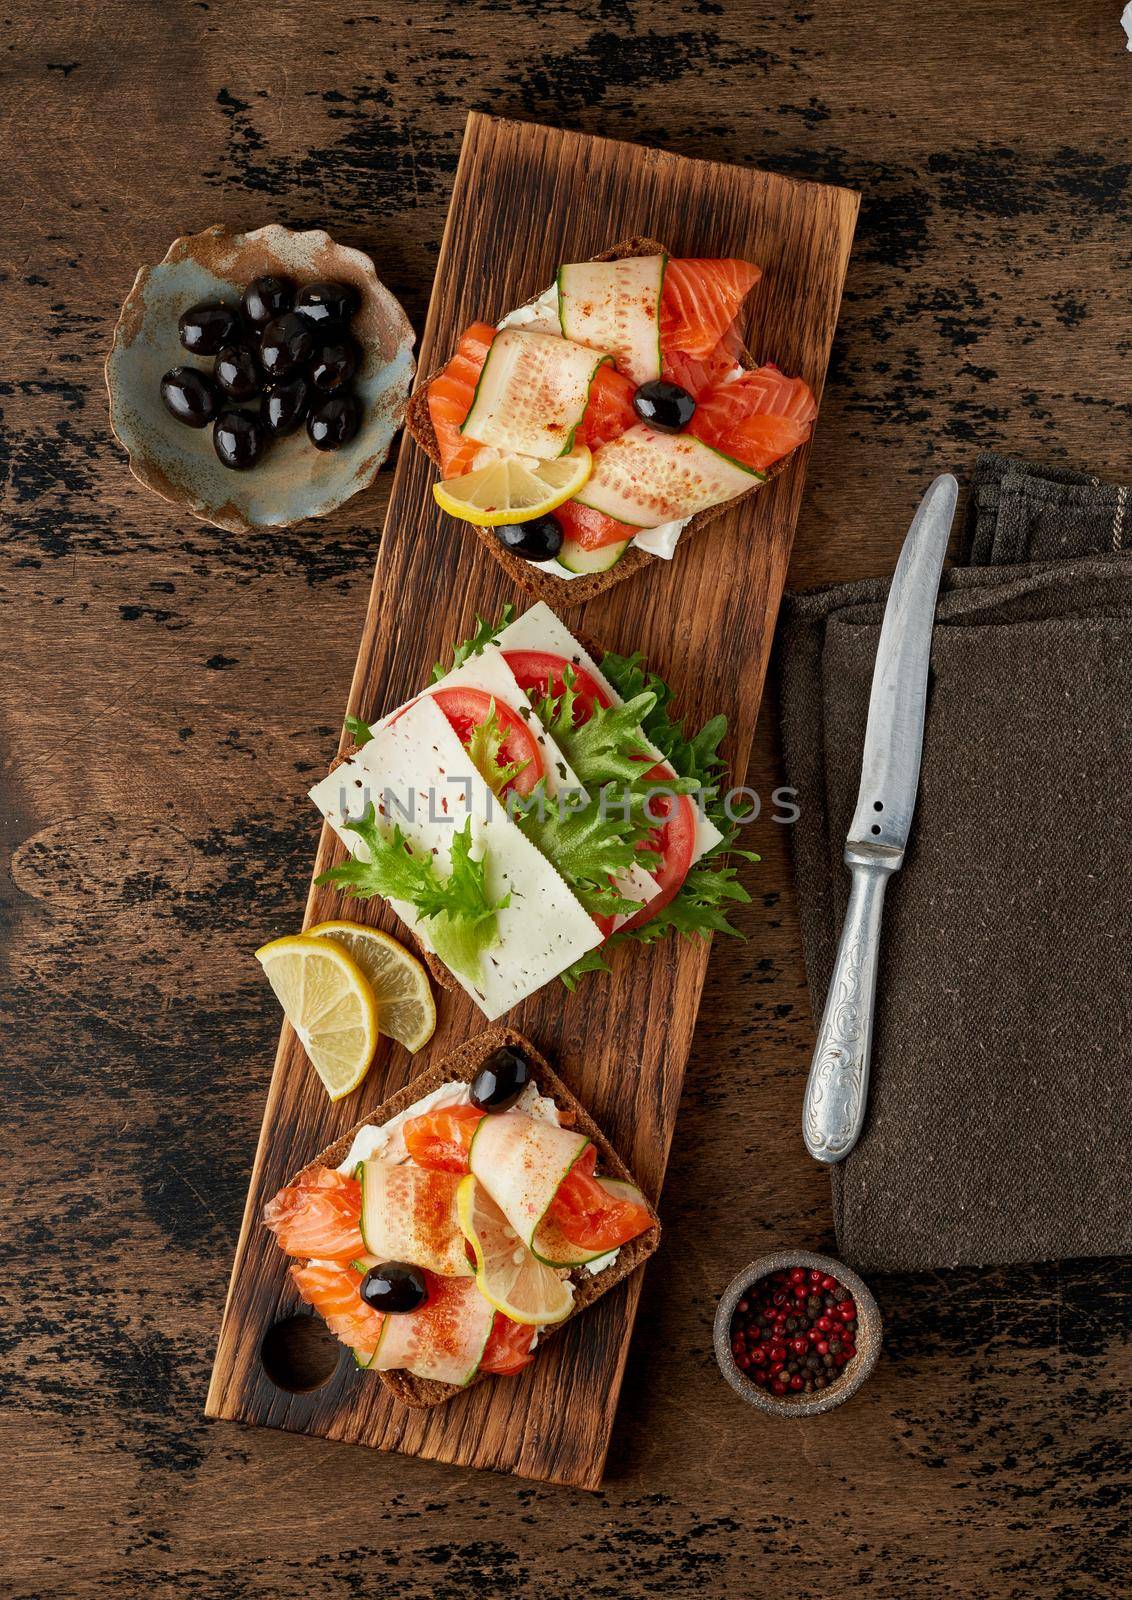 Smorrebrod - traditional Danish sandwiches. Black rye bread with salmon, cream cheese, cucumber, tomatoes on dark brown wooden background, vertical